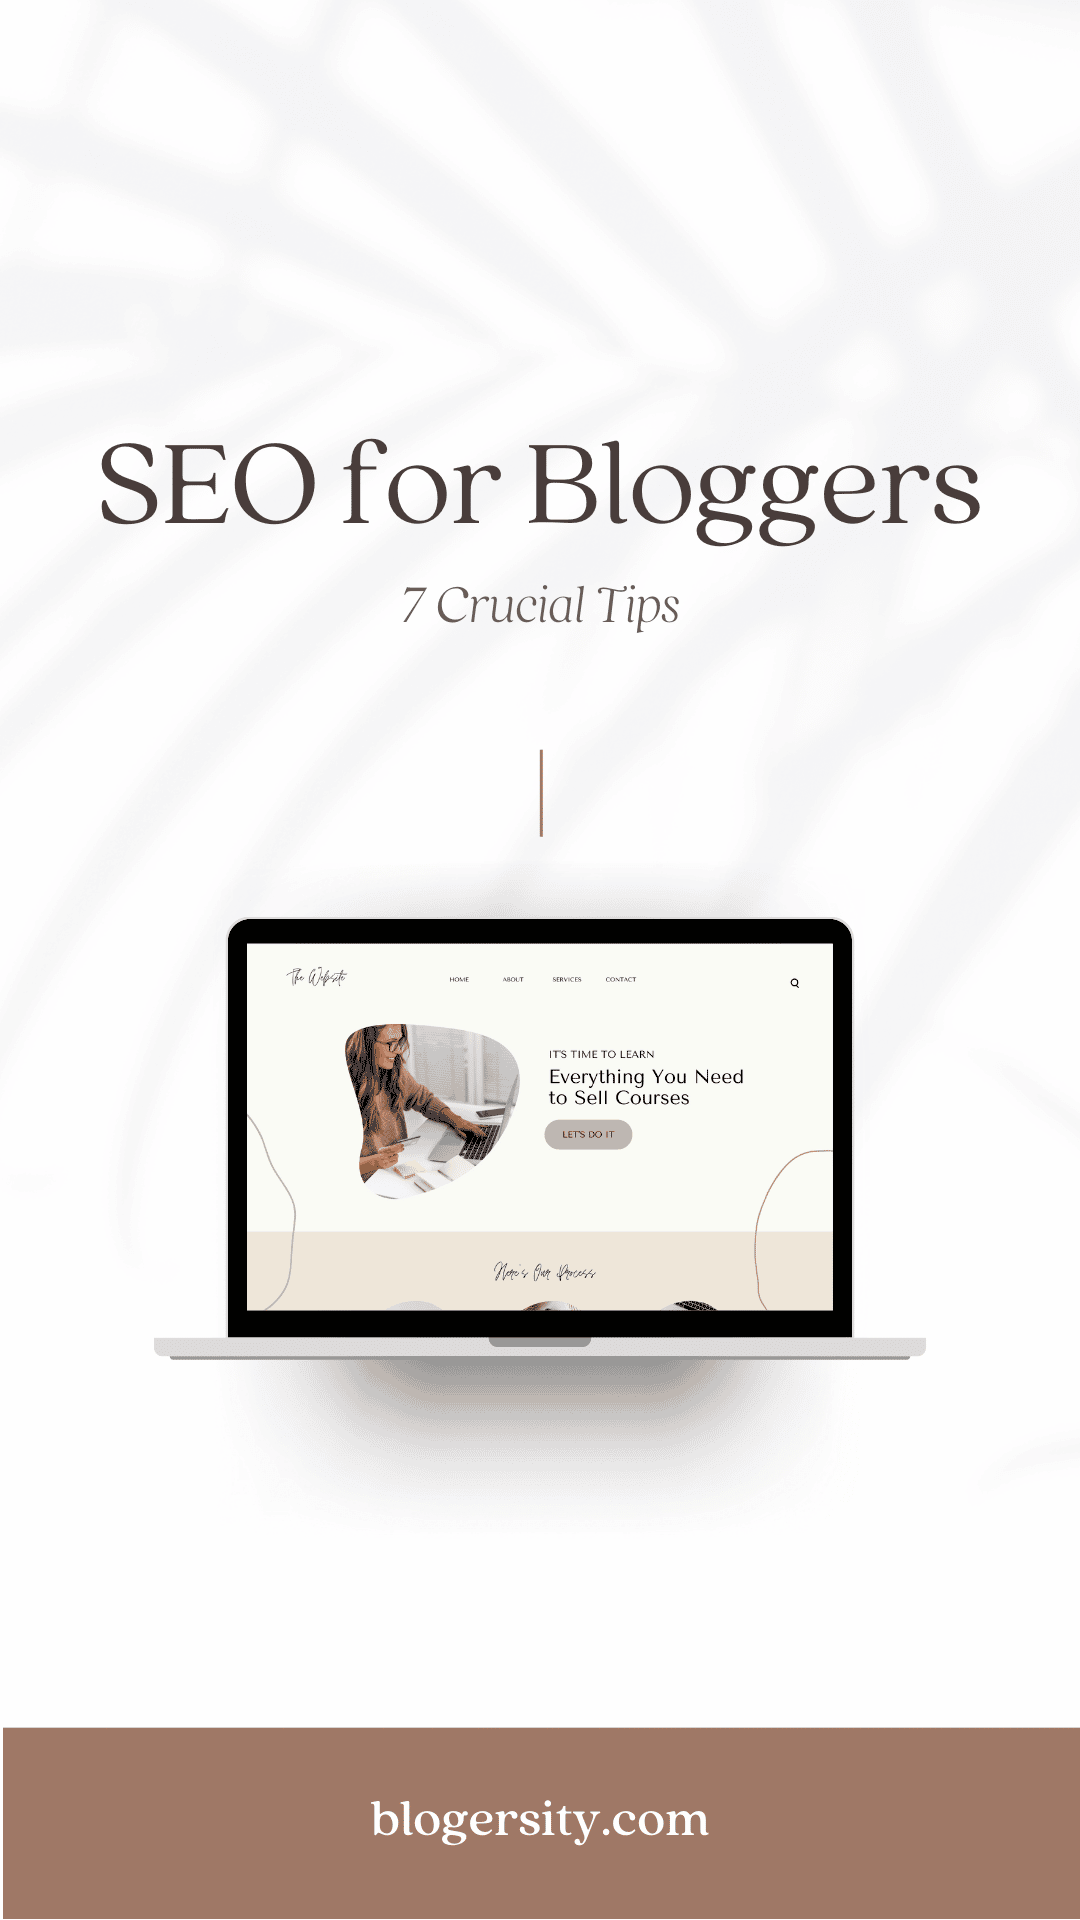 SEO for bloggers - 7 crucial tips